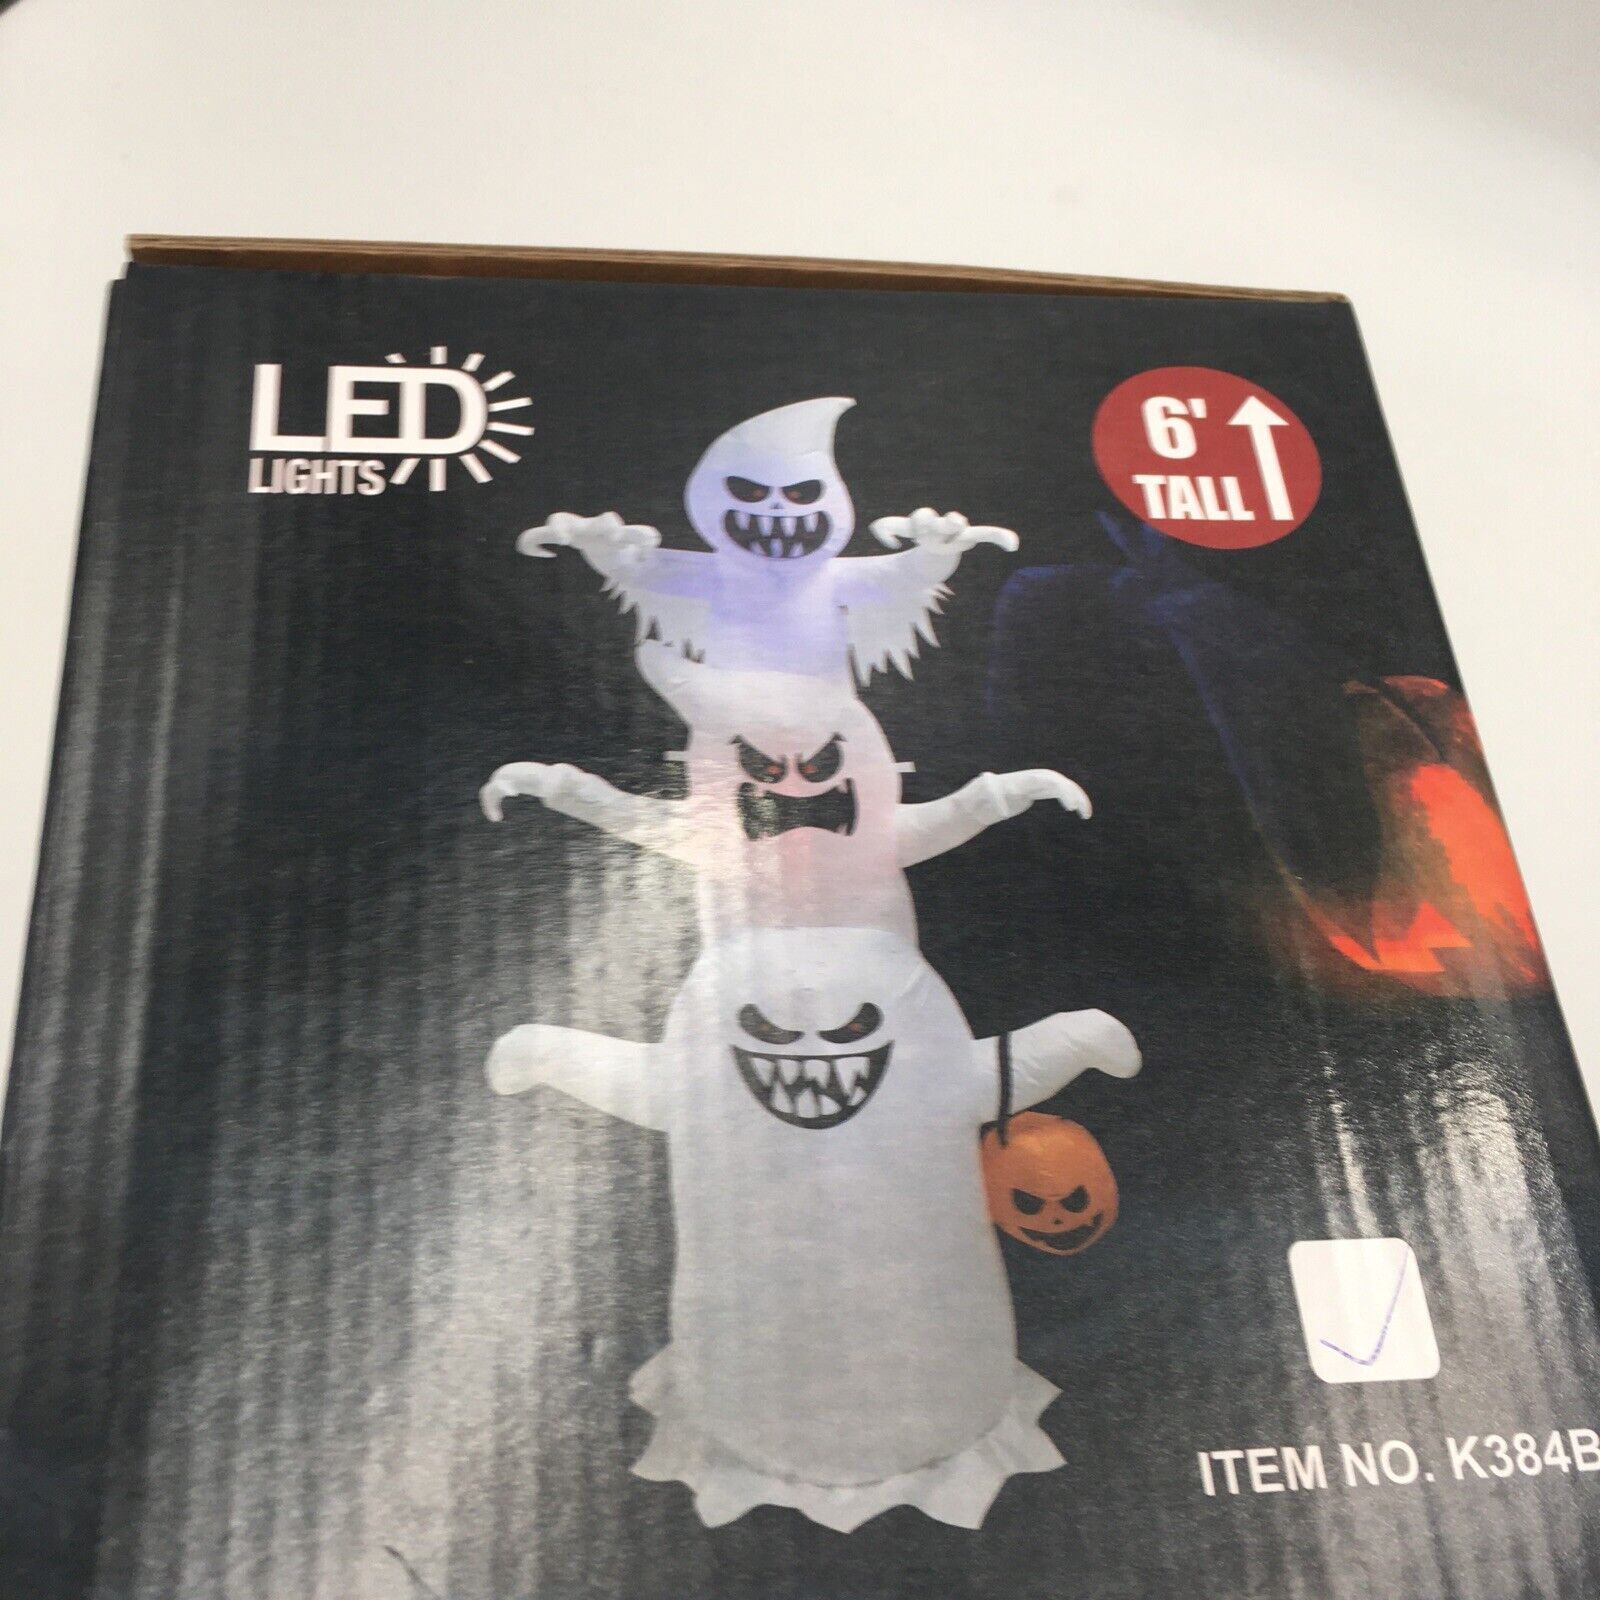 6 Ft Halloween Decorations Inflatable Ghost Stack with Led Light Built-in New